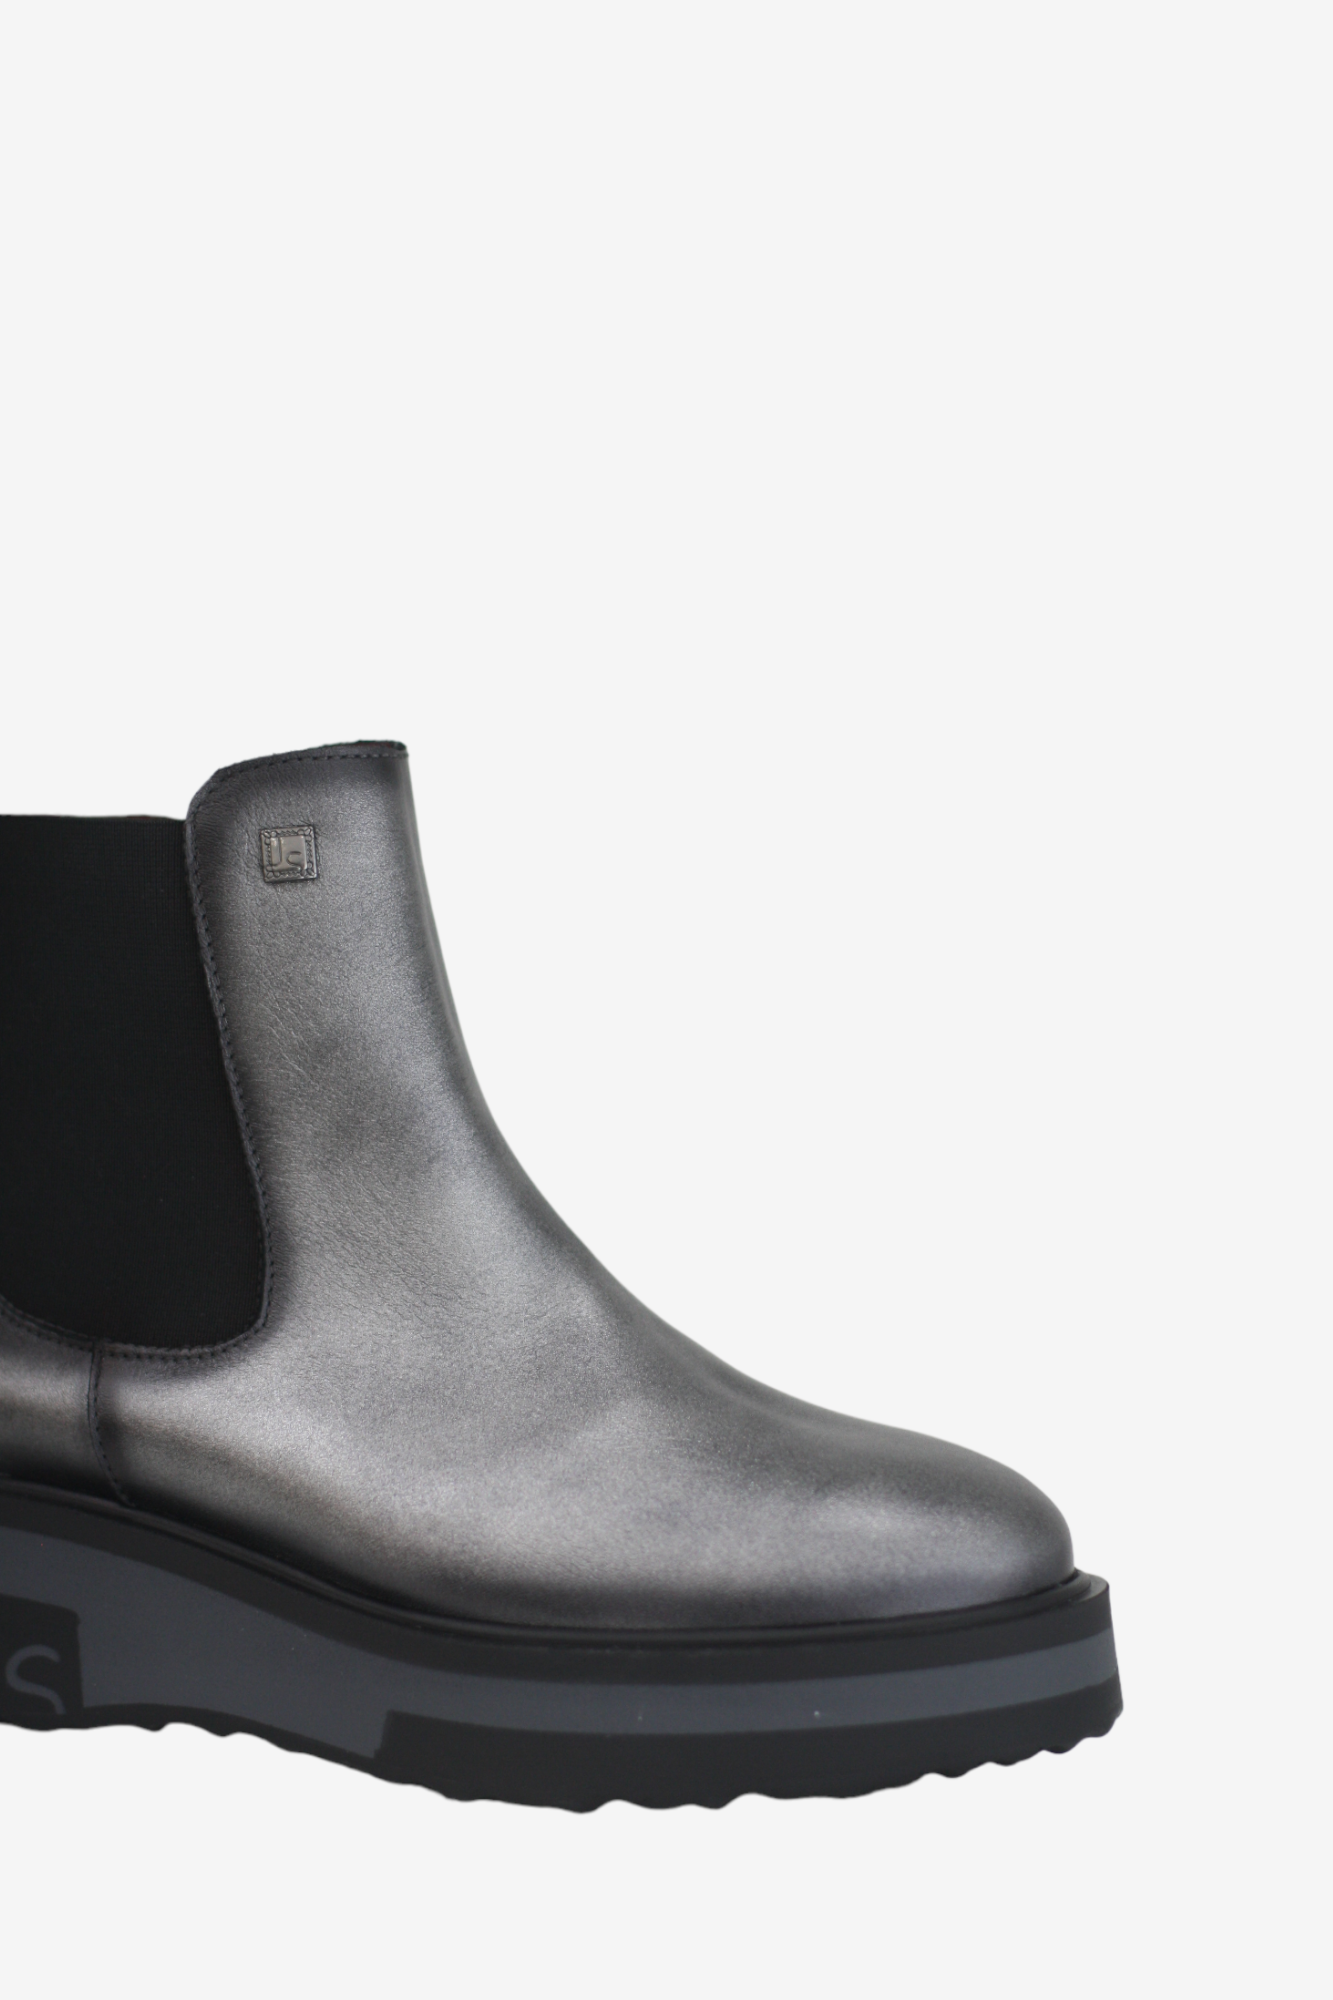 JOSE SAENZ 3157 PEWTER LEATHER CHELSEA BOOT